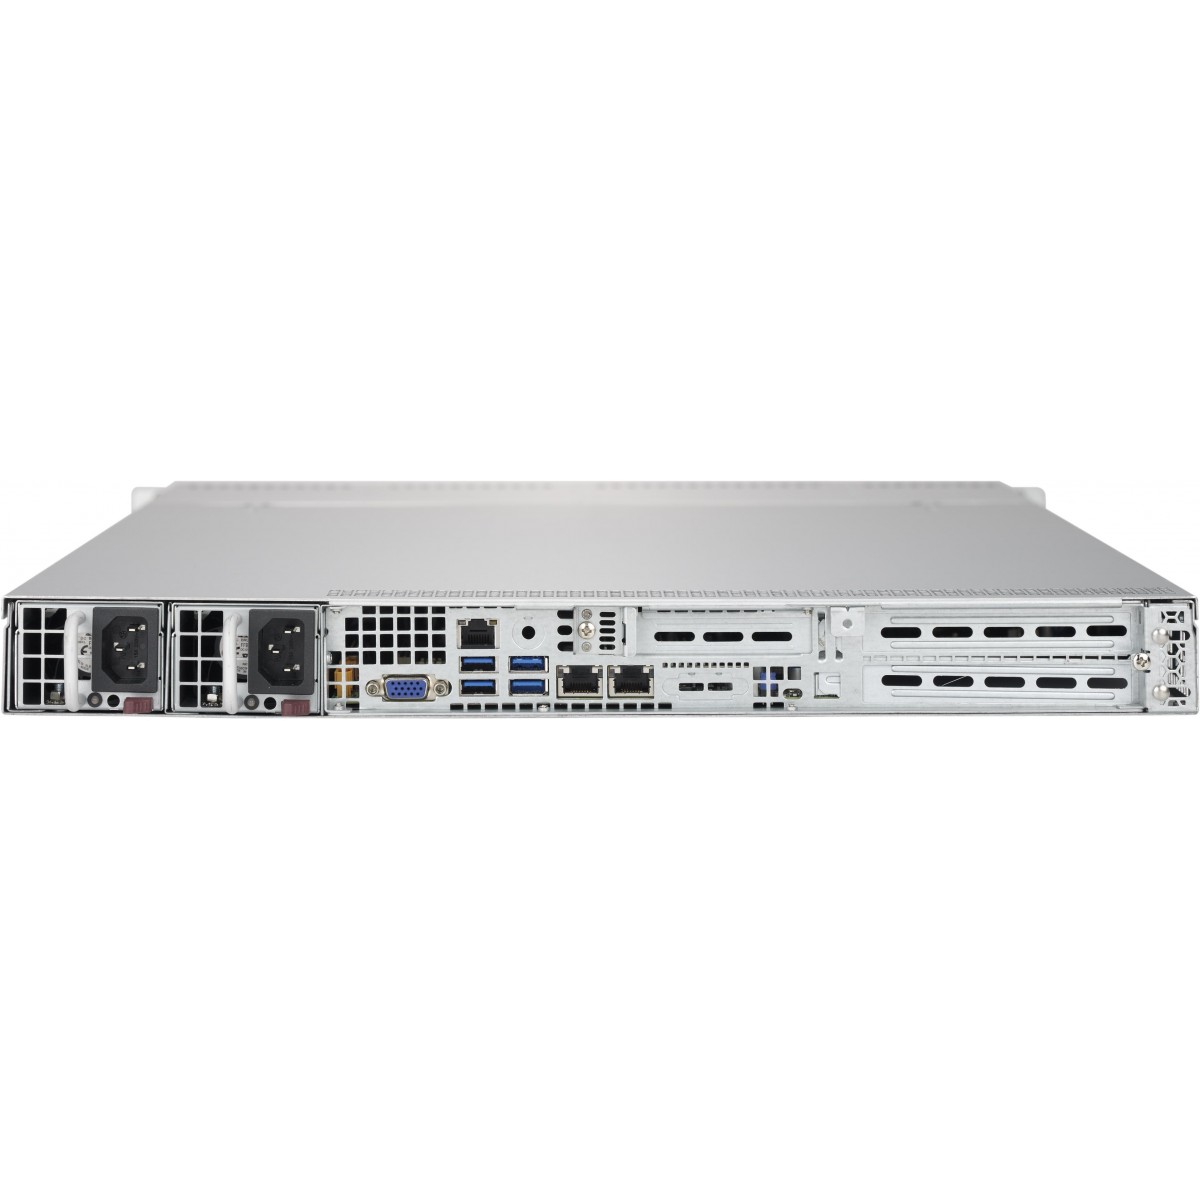 Supermicro server chassis CSE-LA15TQC-R504W Optimized for WIO (W series) motherboards, support MB size up to 12.3" x 13.4", 2x f